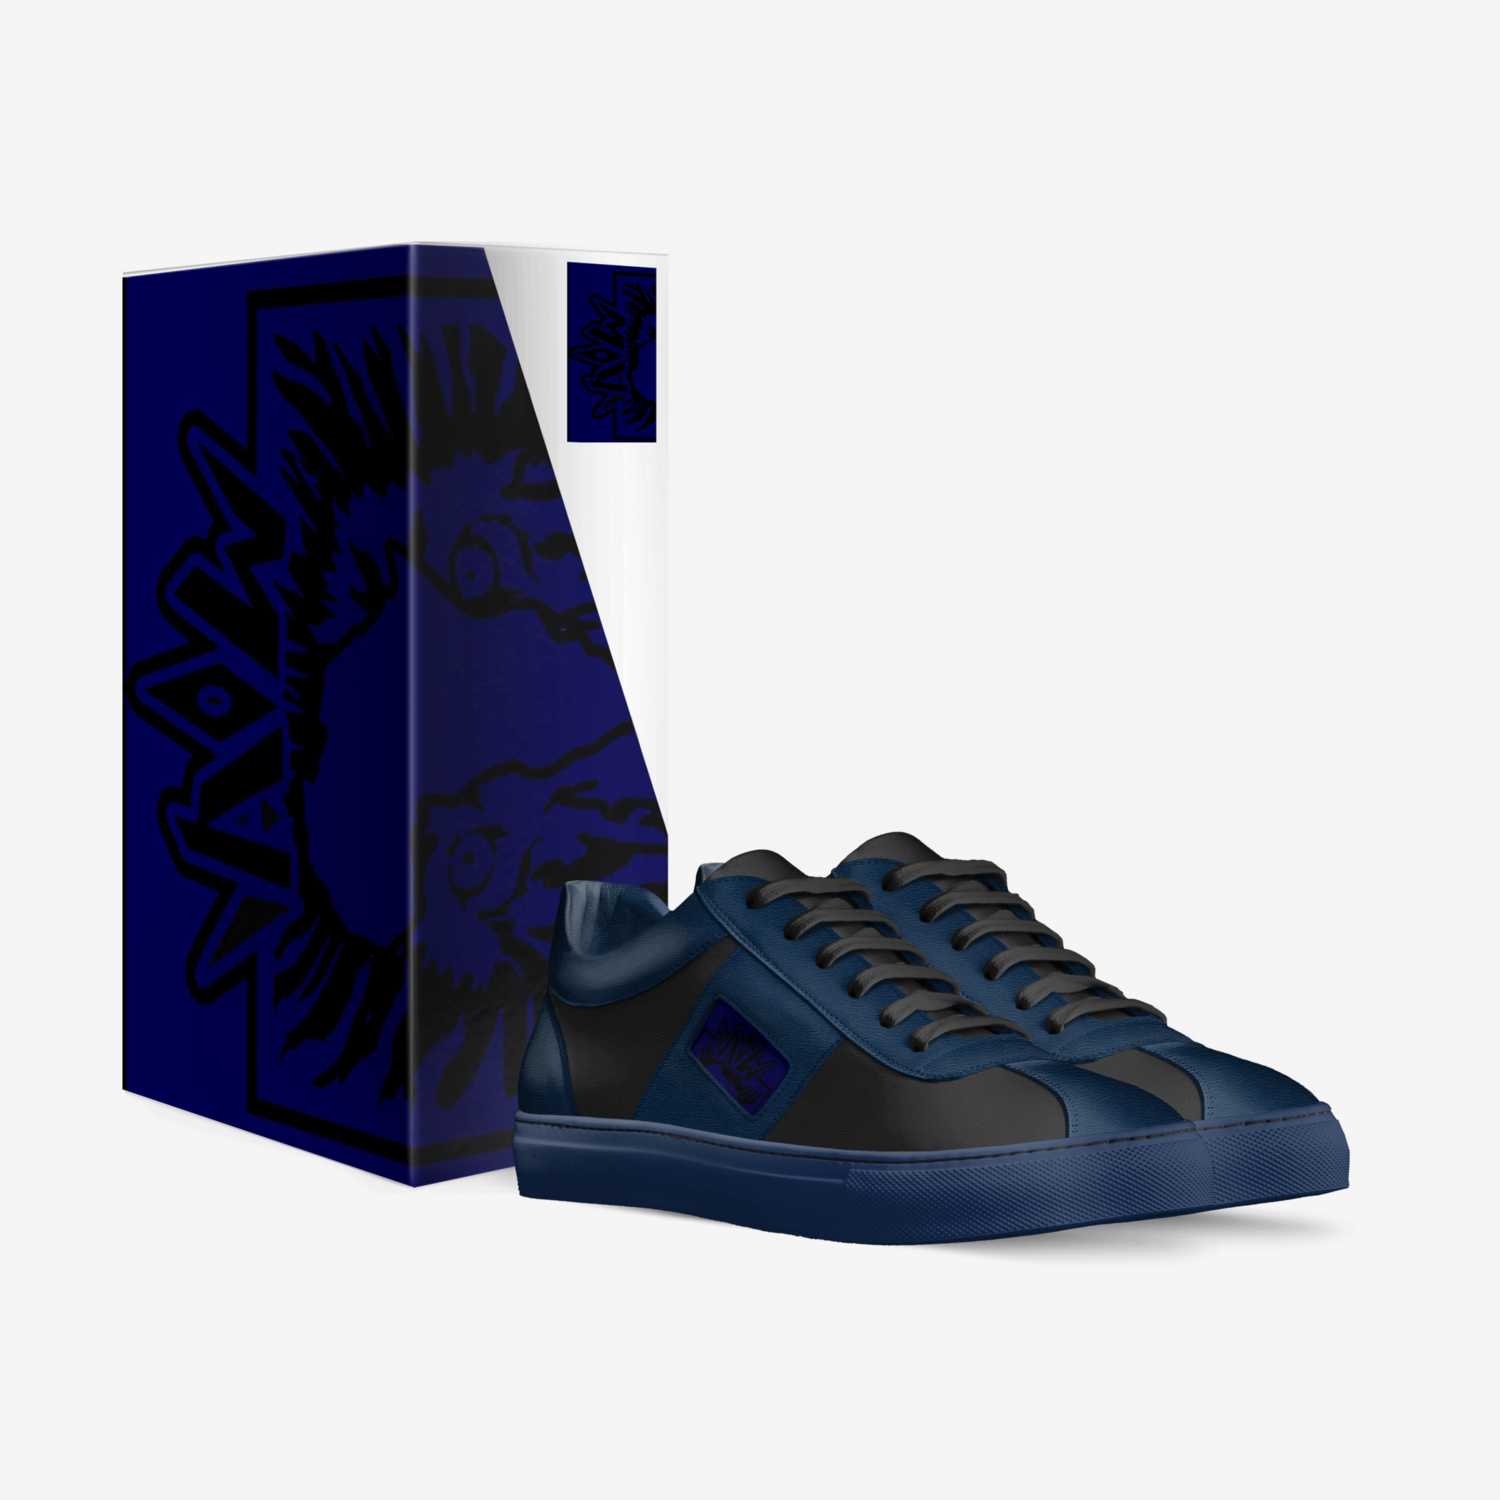 DUB LOW'S BLK/BLUE custom made in Italy shoes by Adrian Willis | Box view